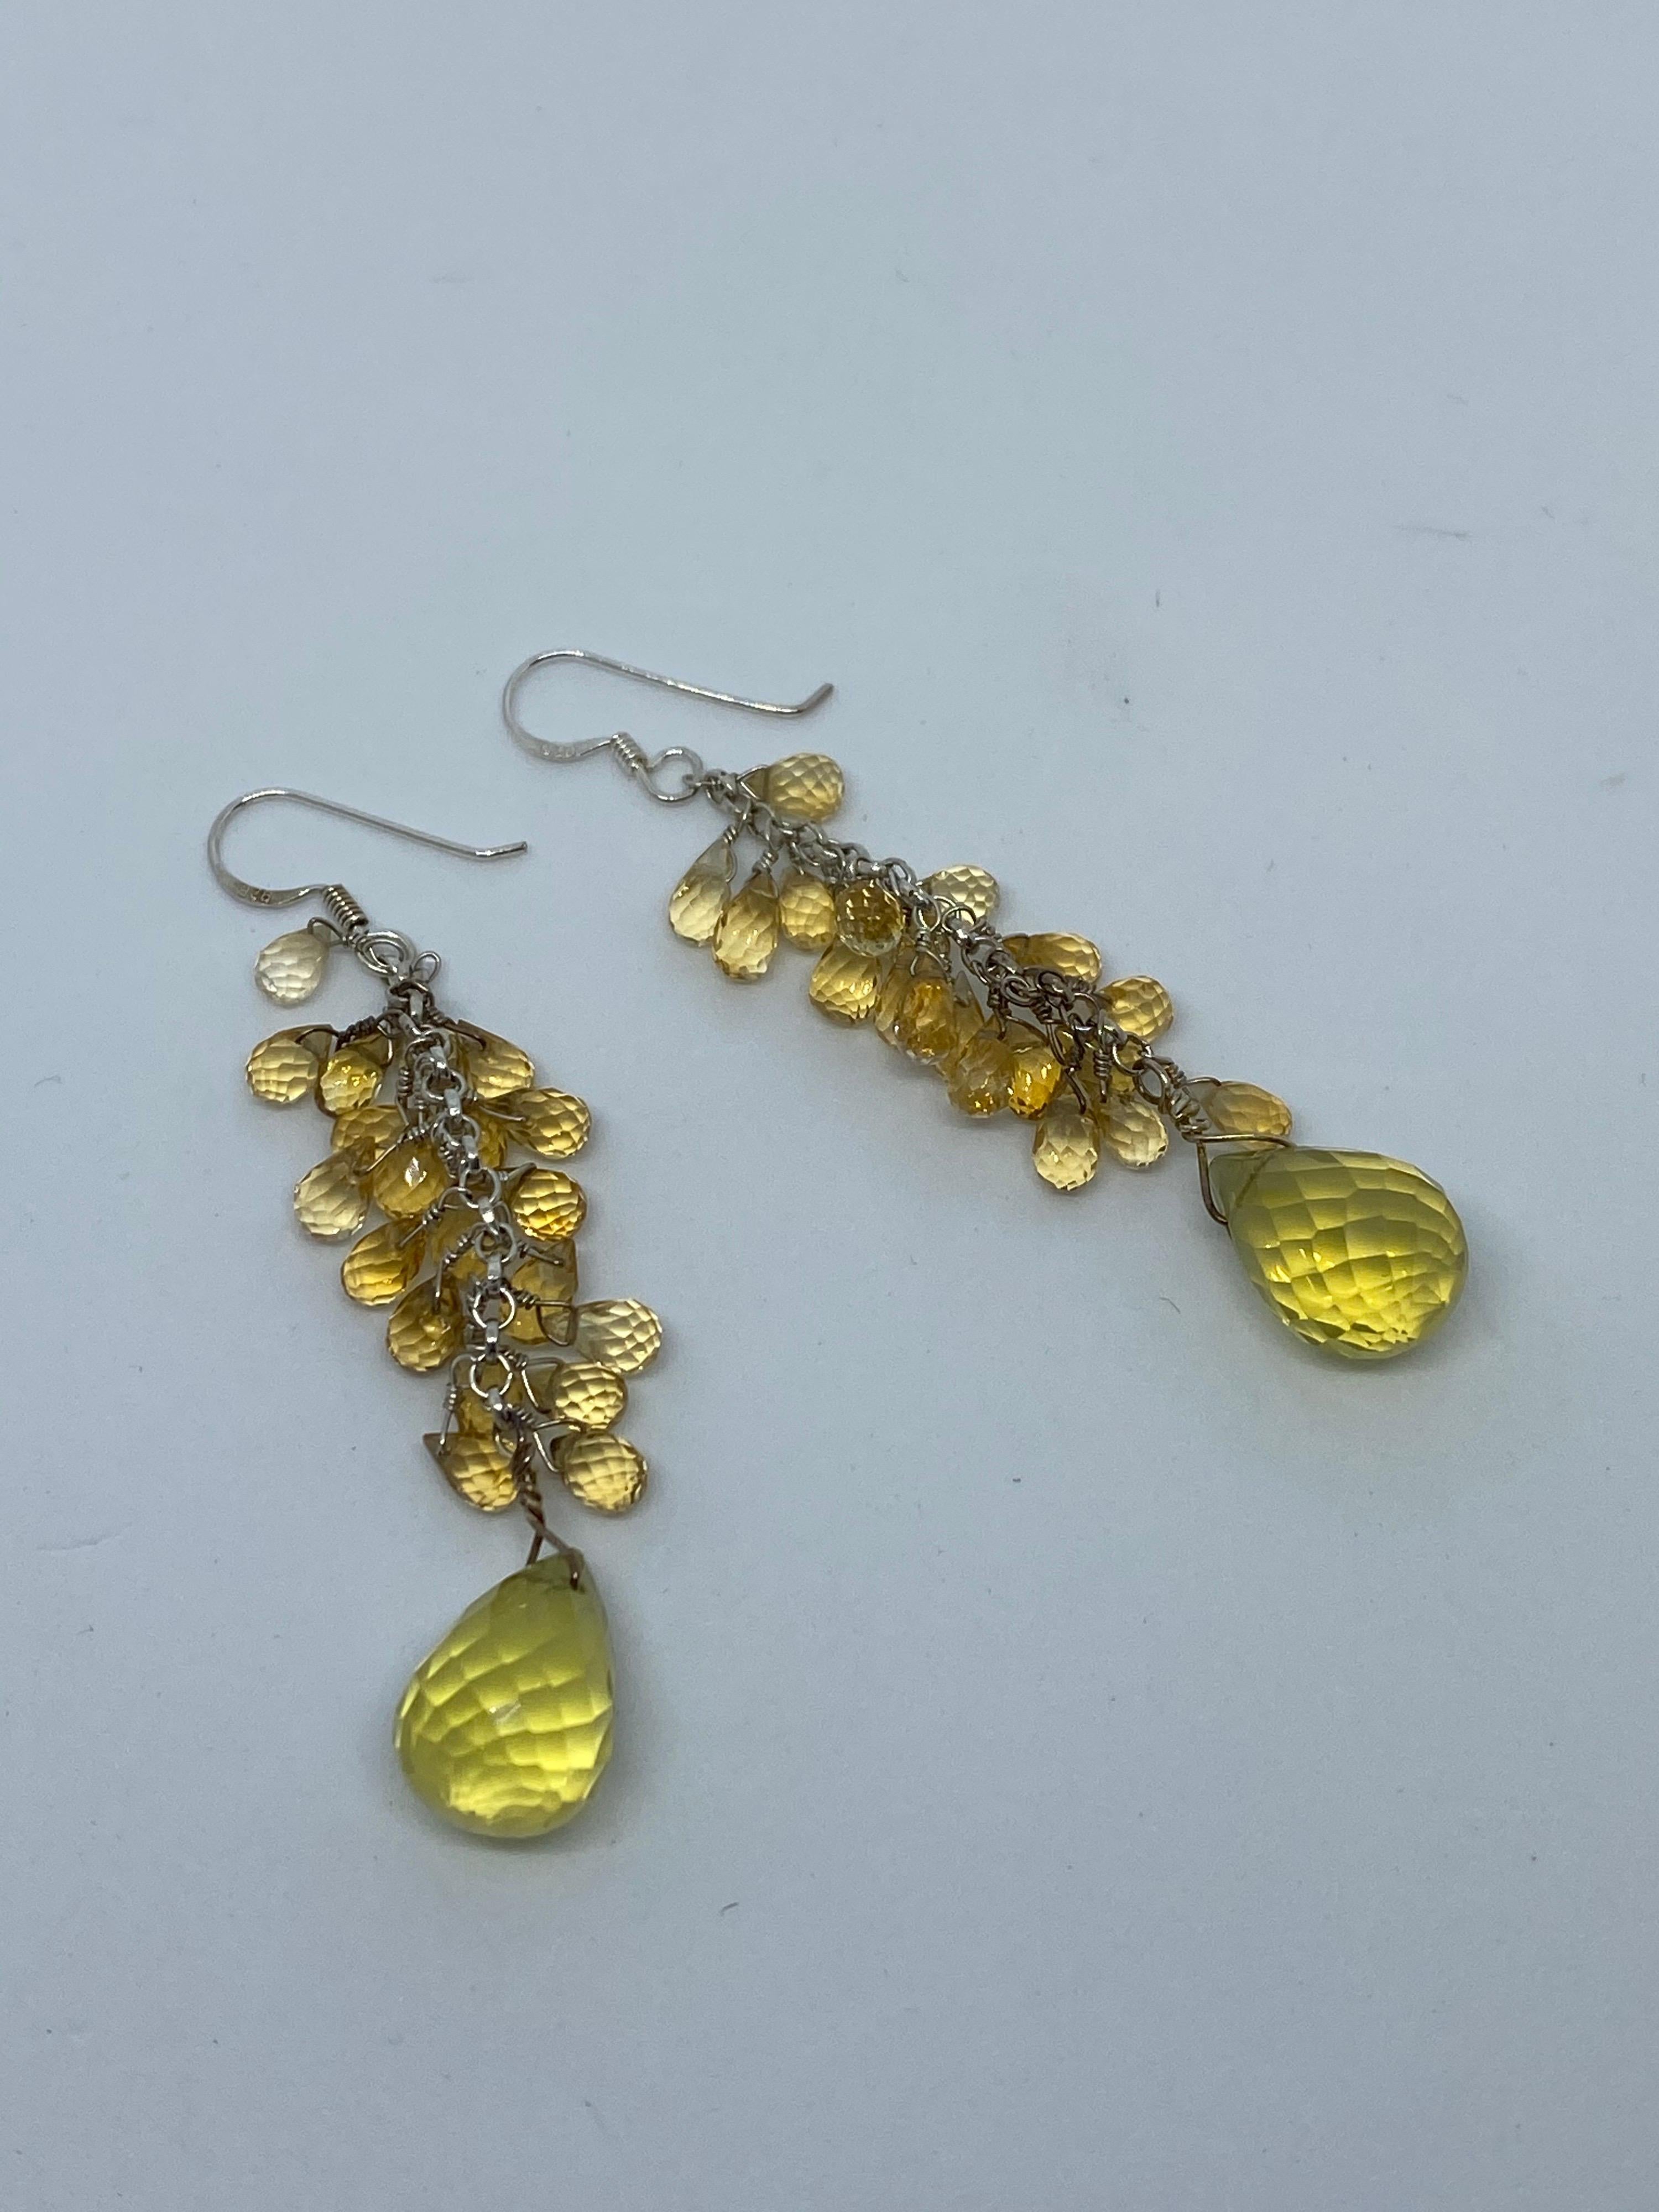 These earrings measure 3 inches in length and have a bold look with hues of yellow, brown, and green depending on the lighting. The Citrine Briolettes and hand-wired in Sterling Silver and lead down to the large Lemon Quartz Briolette Dangle. 